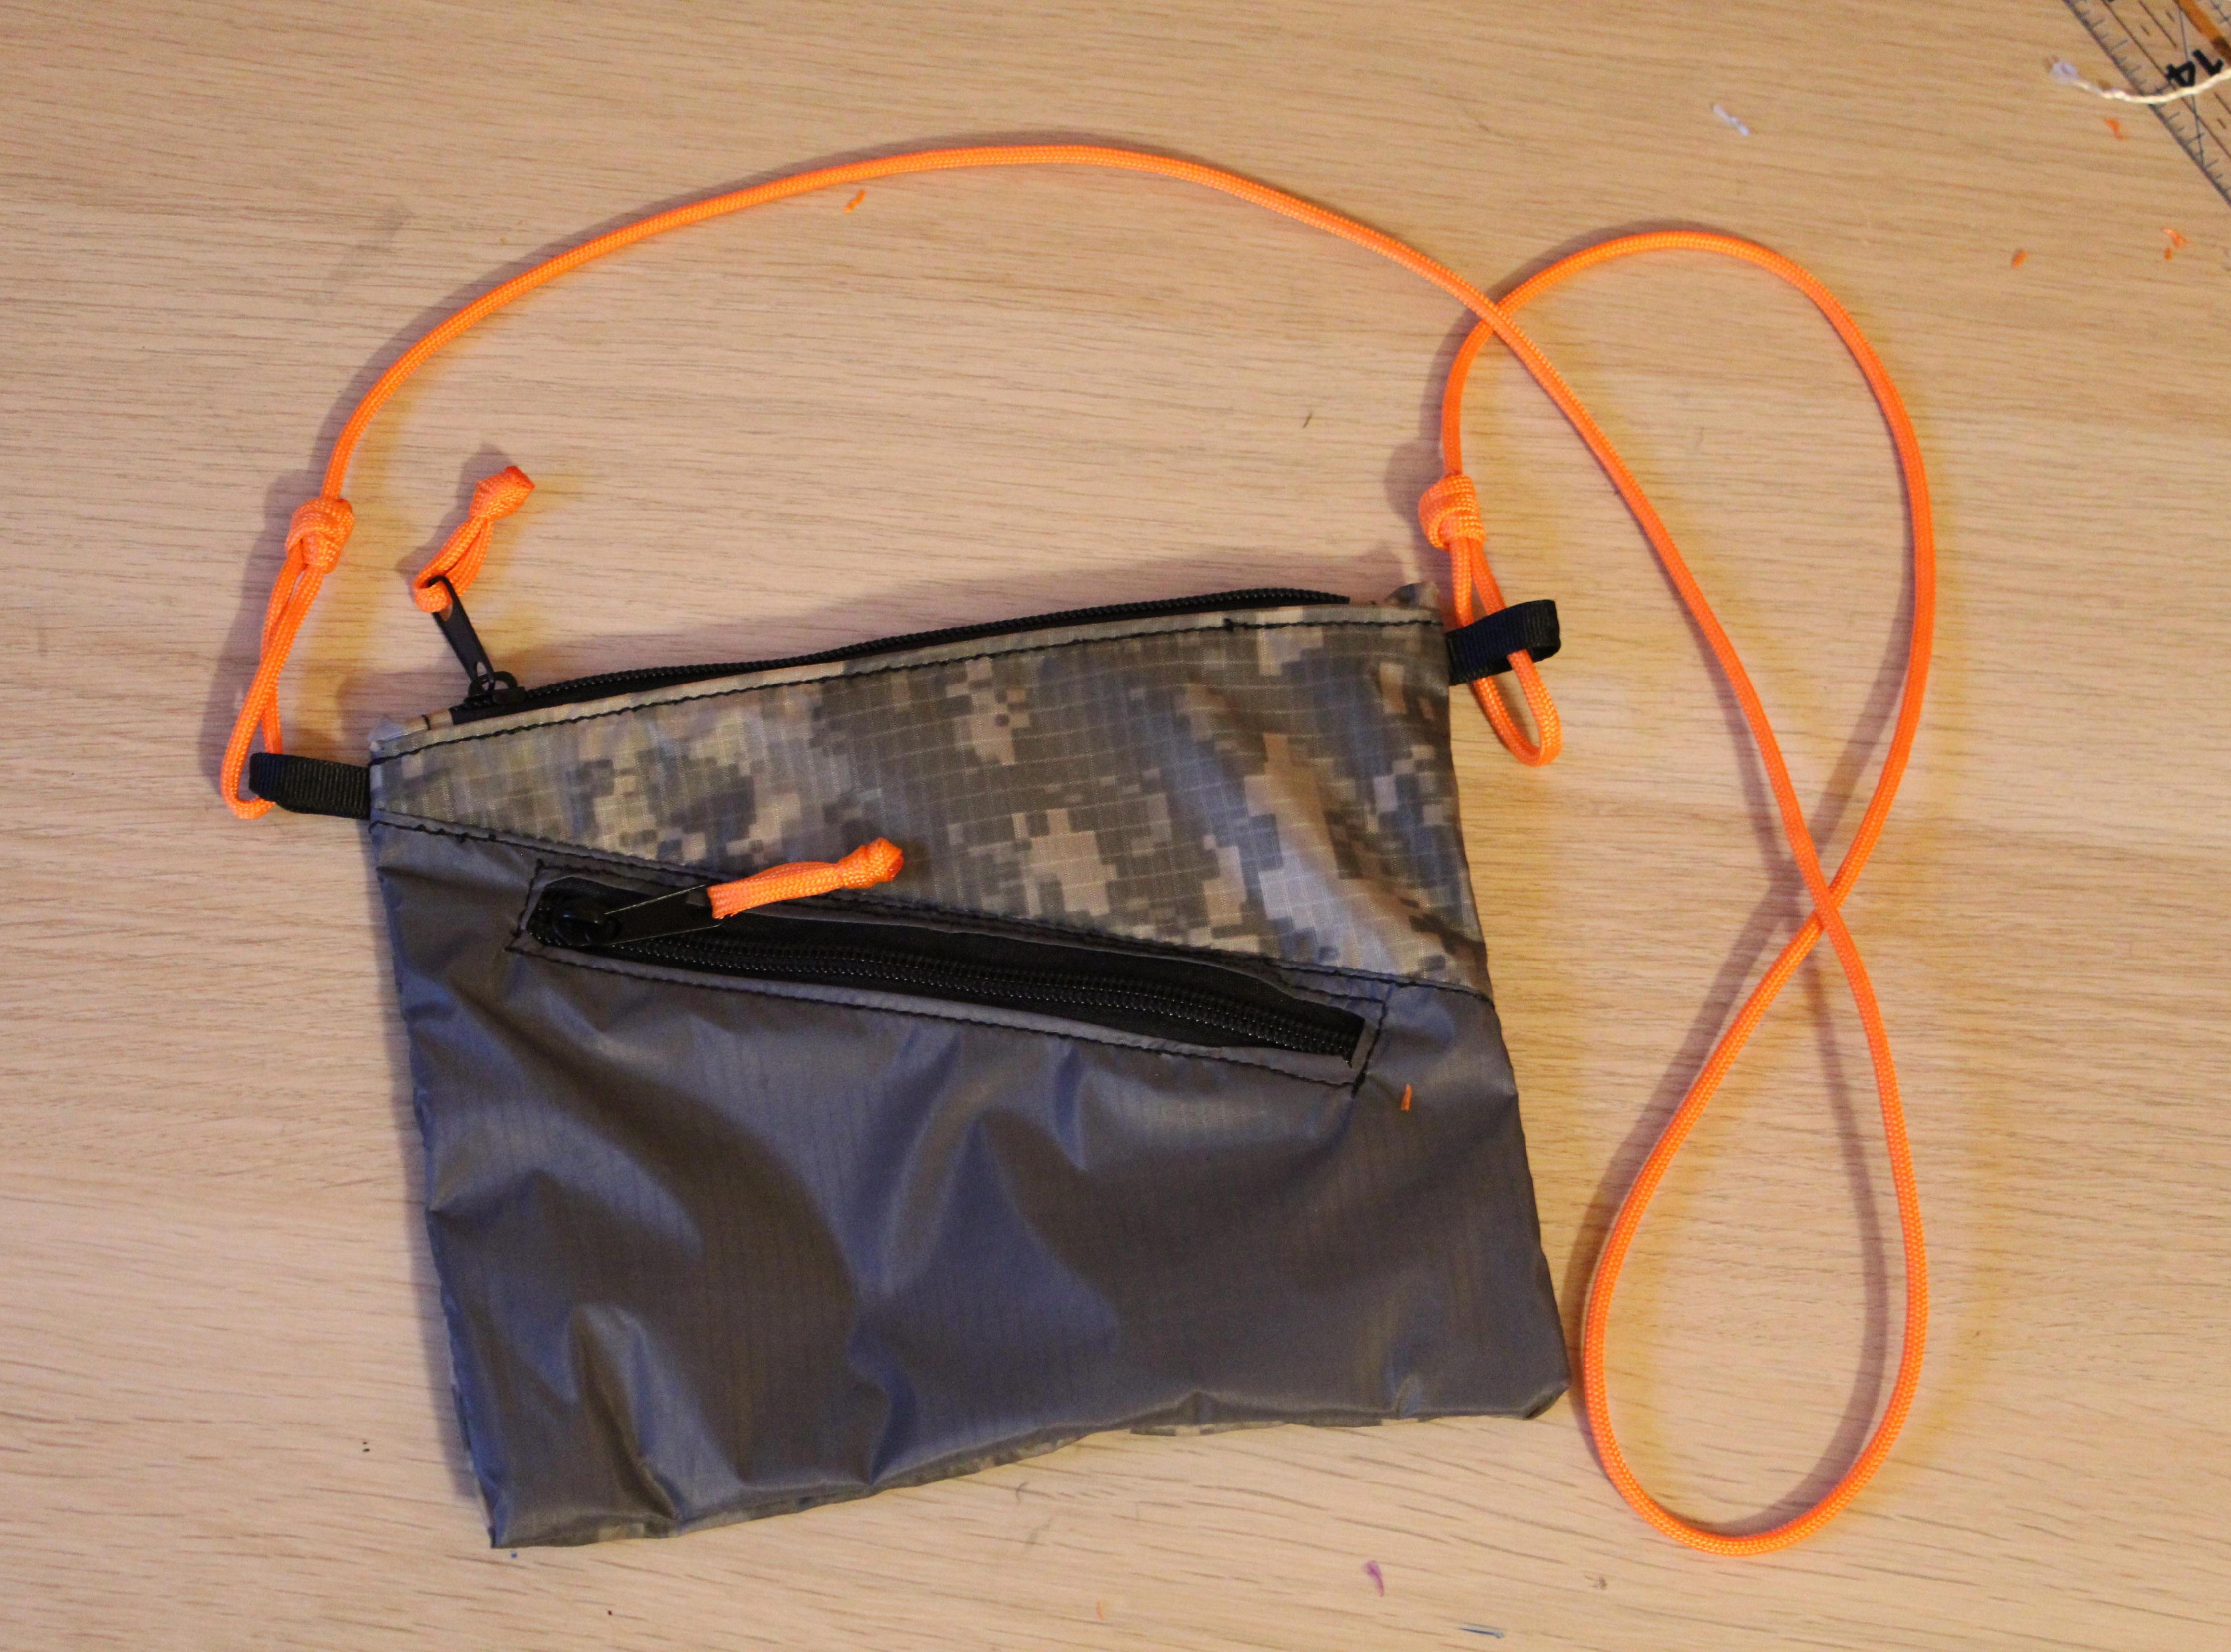 How to Make a Small Adventure Ready Bag